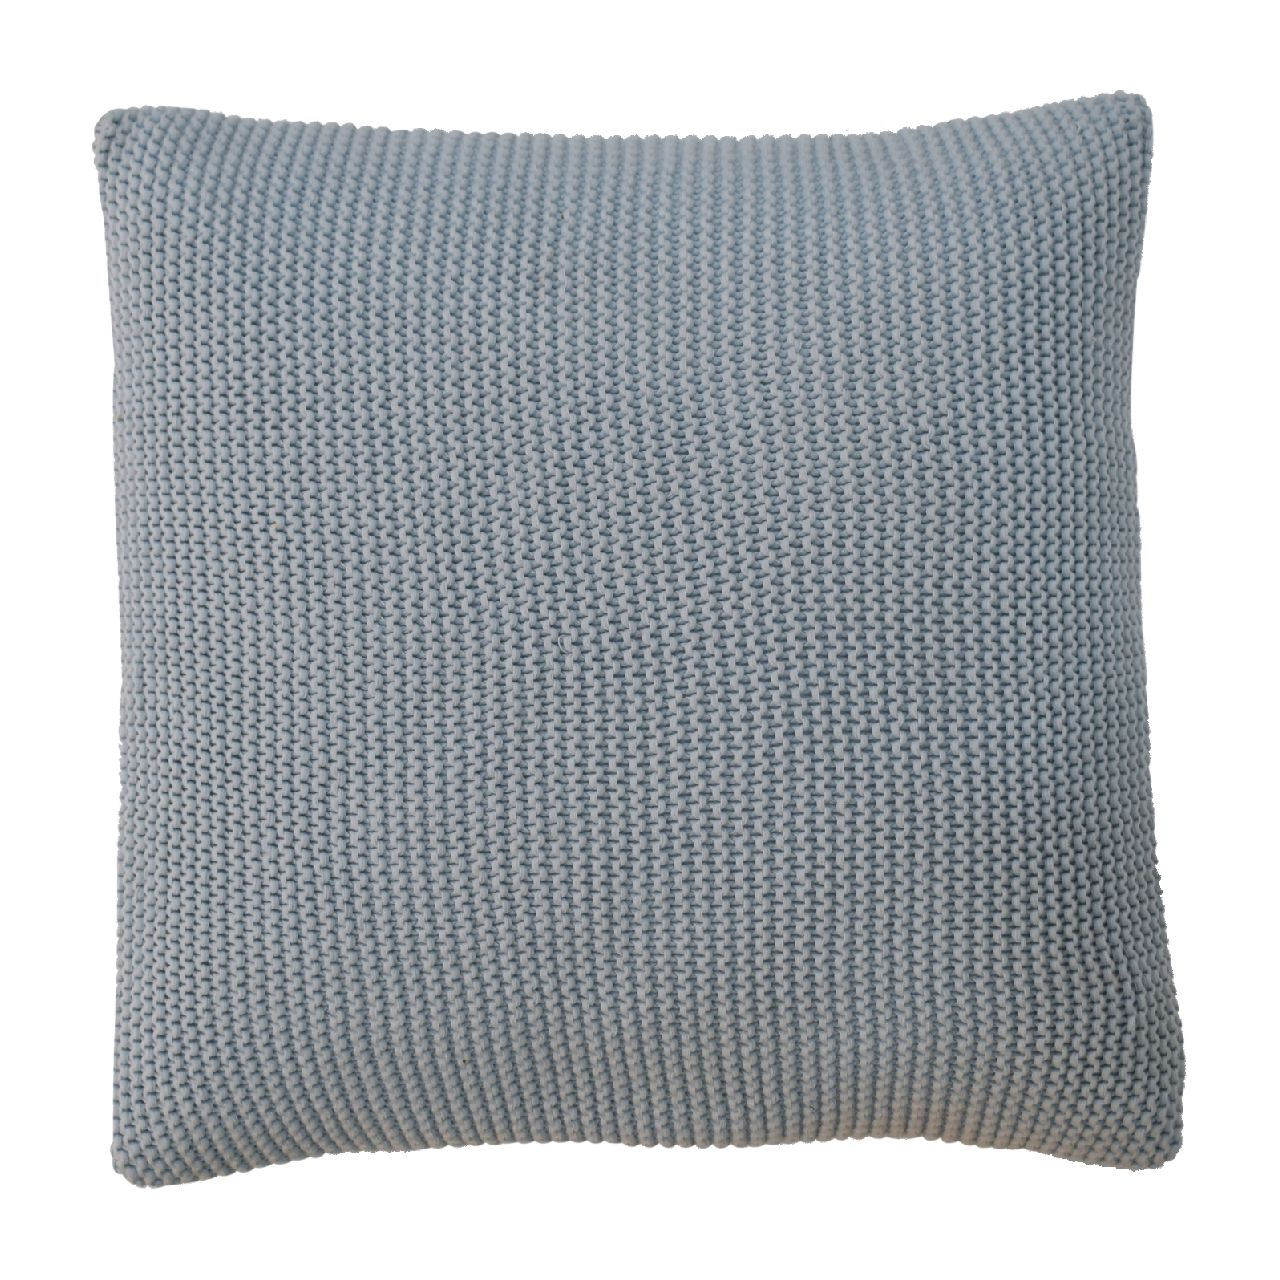 View Blue Cotton Cushion Set of 2 information